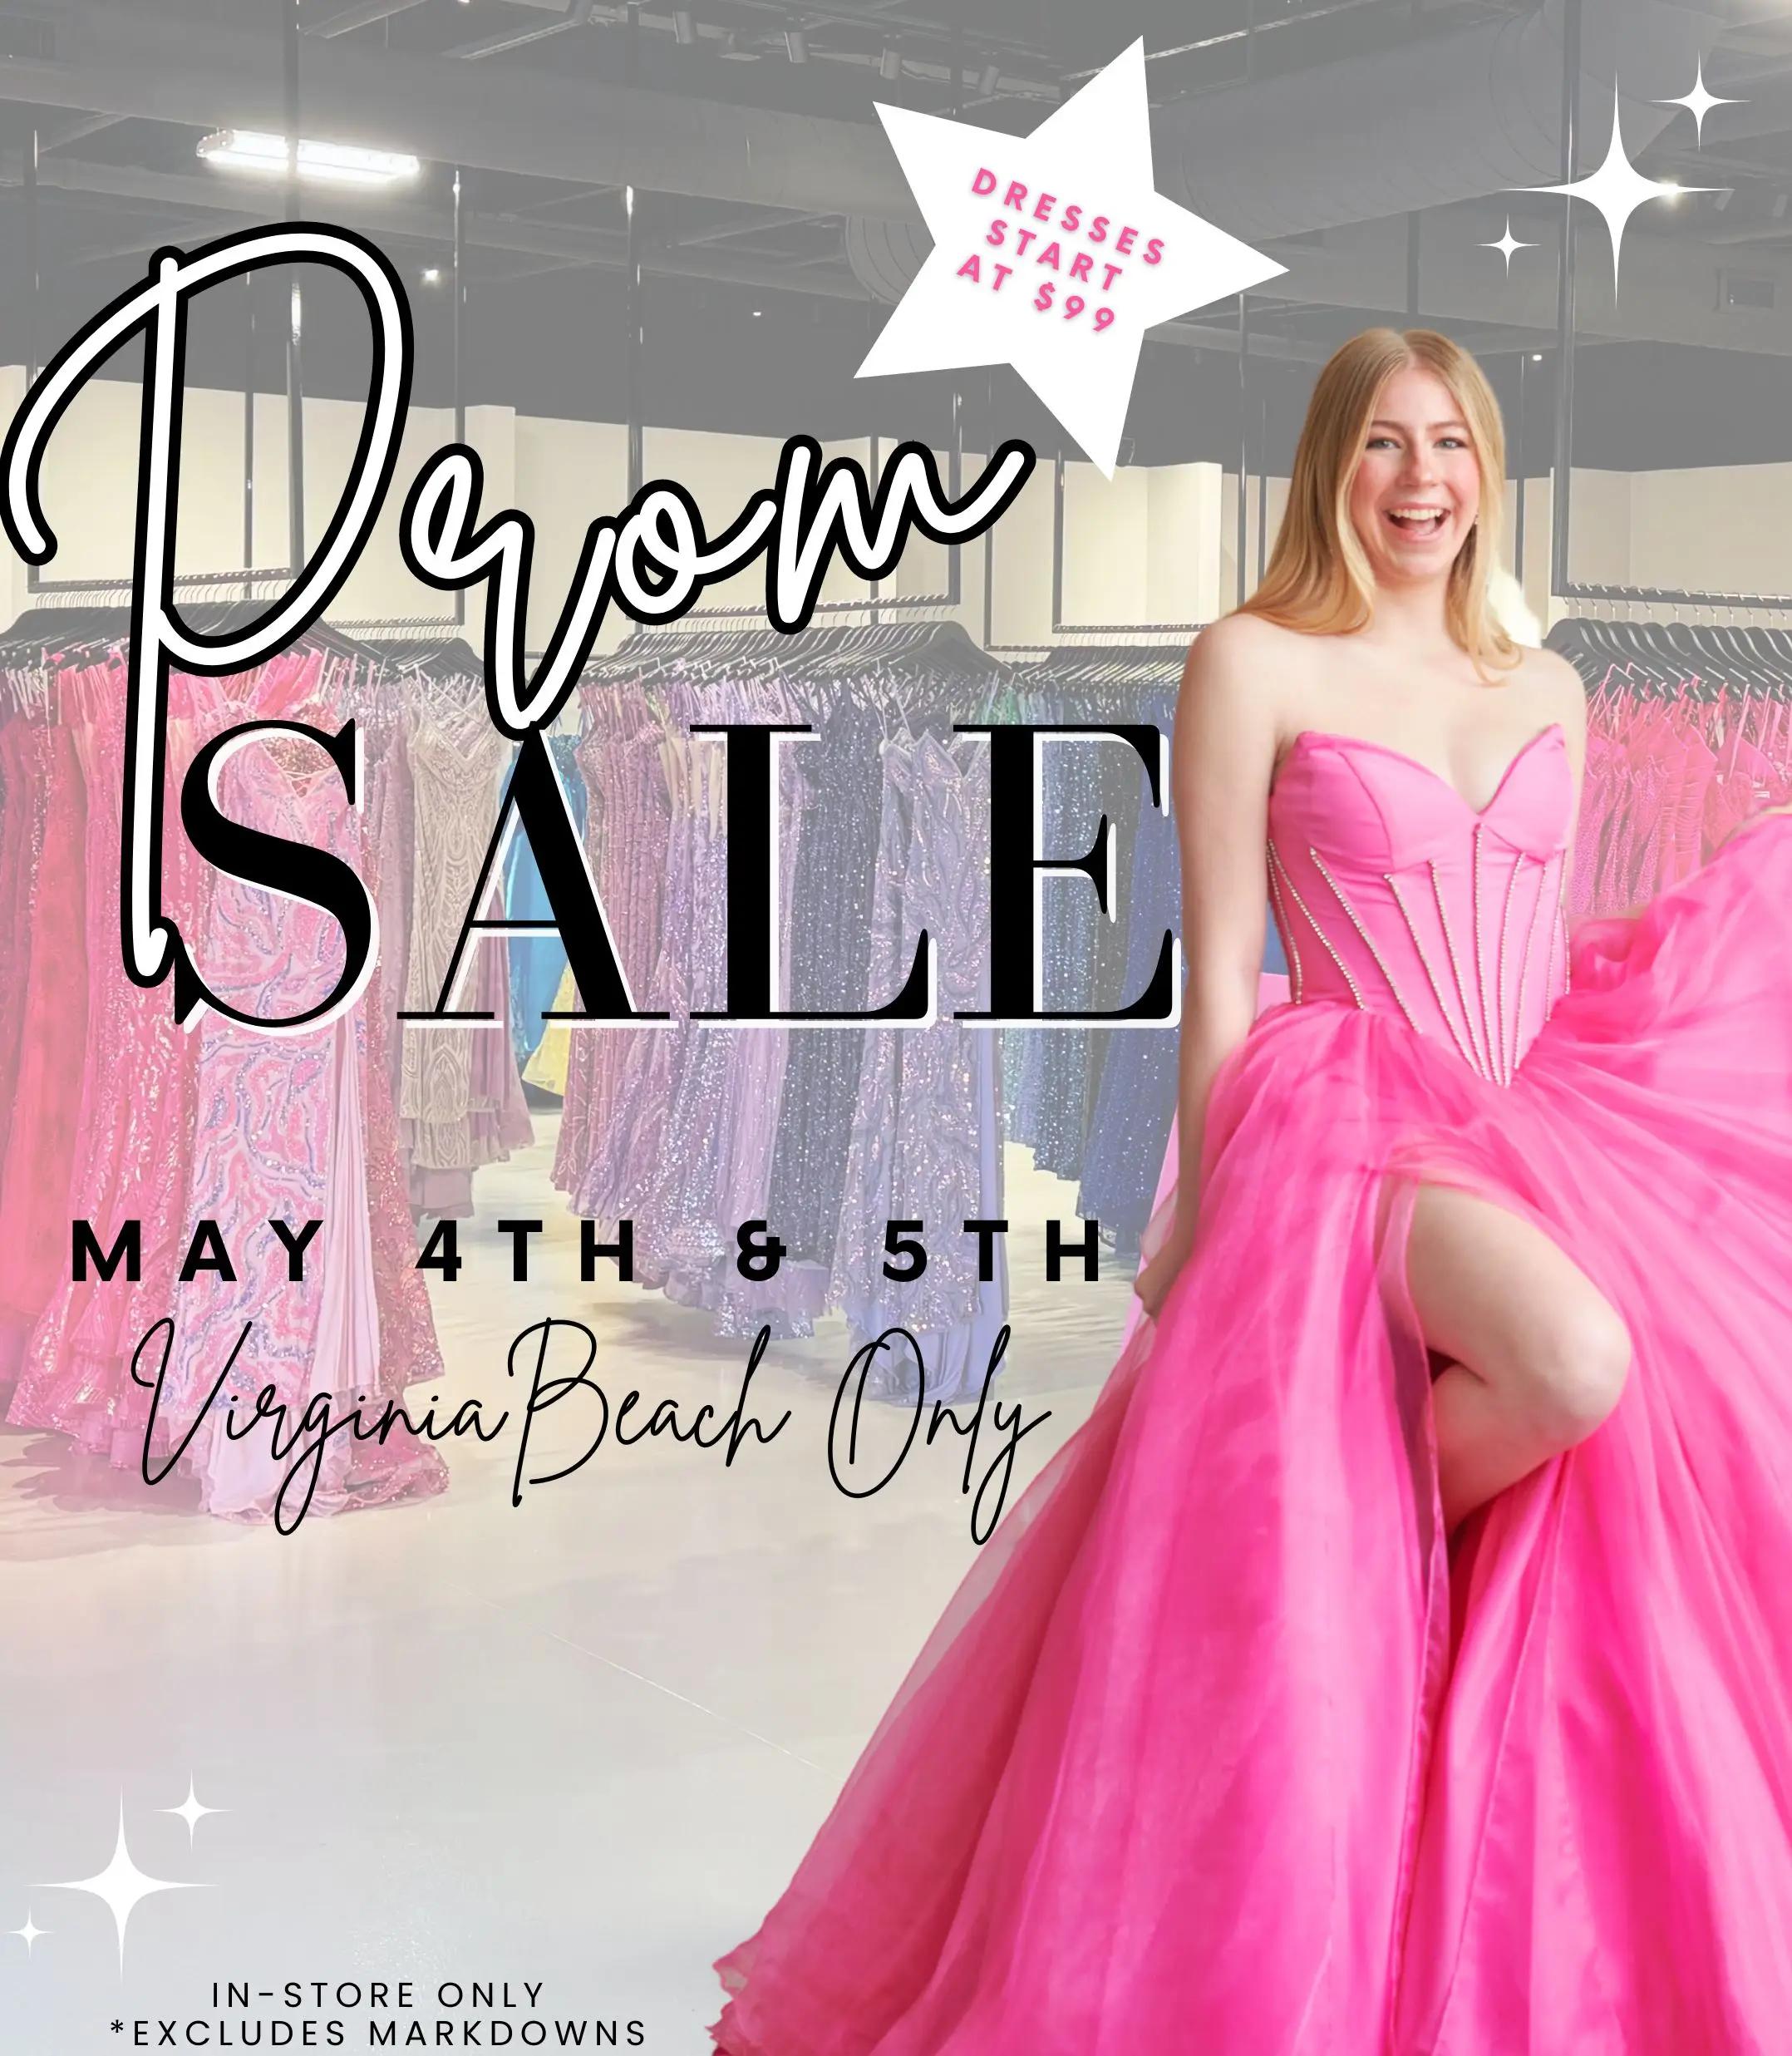 The Prom Sale at Virginia Beach